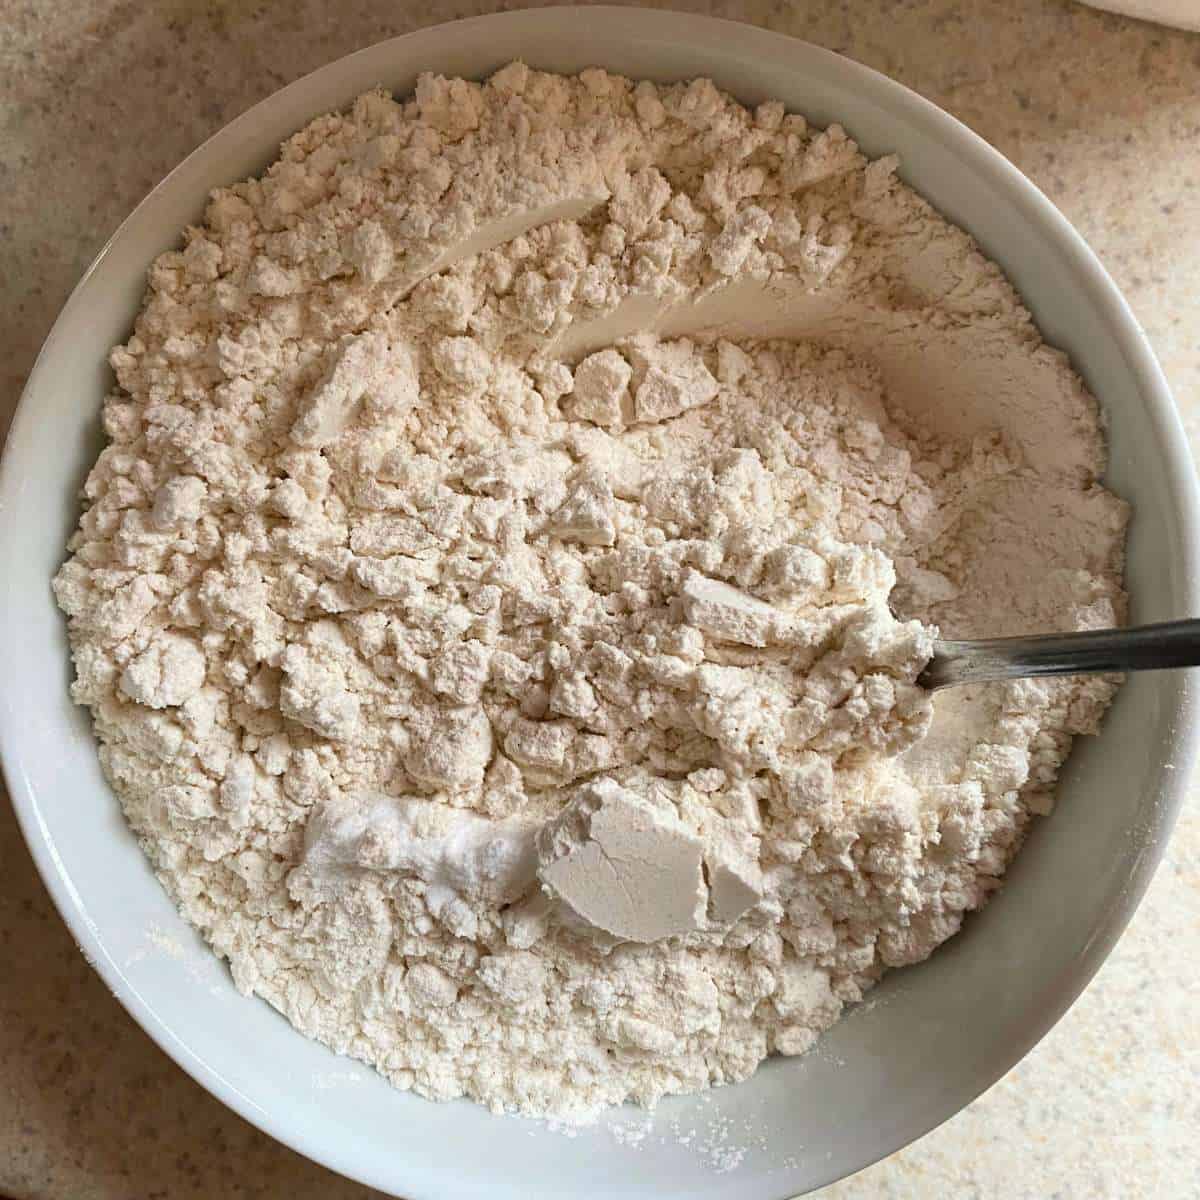 gluten free flour, baking soda, and salt mixed together in a bowl.